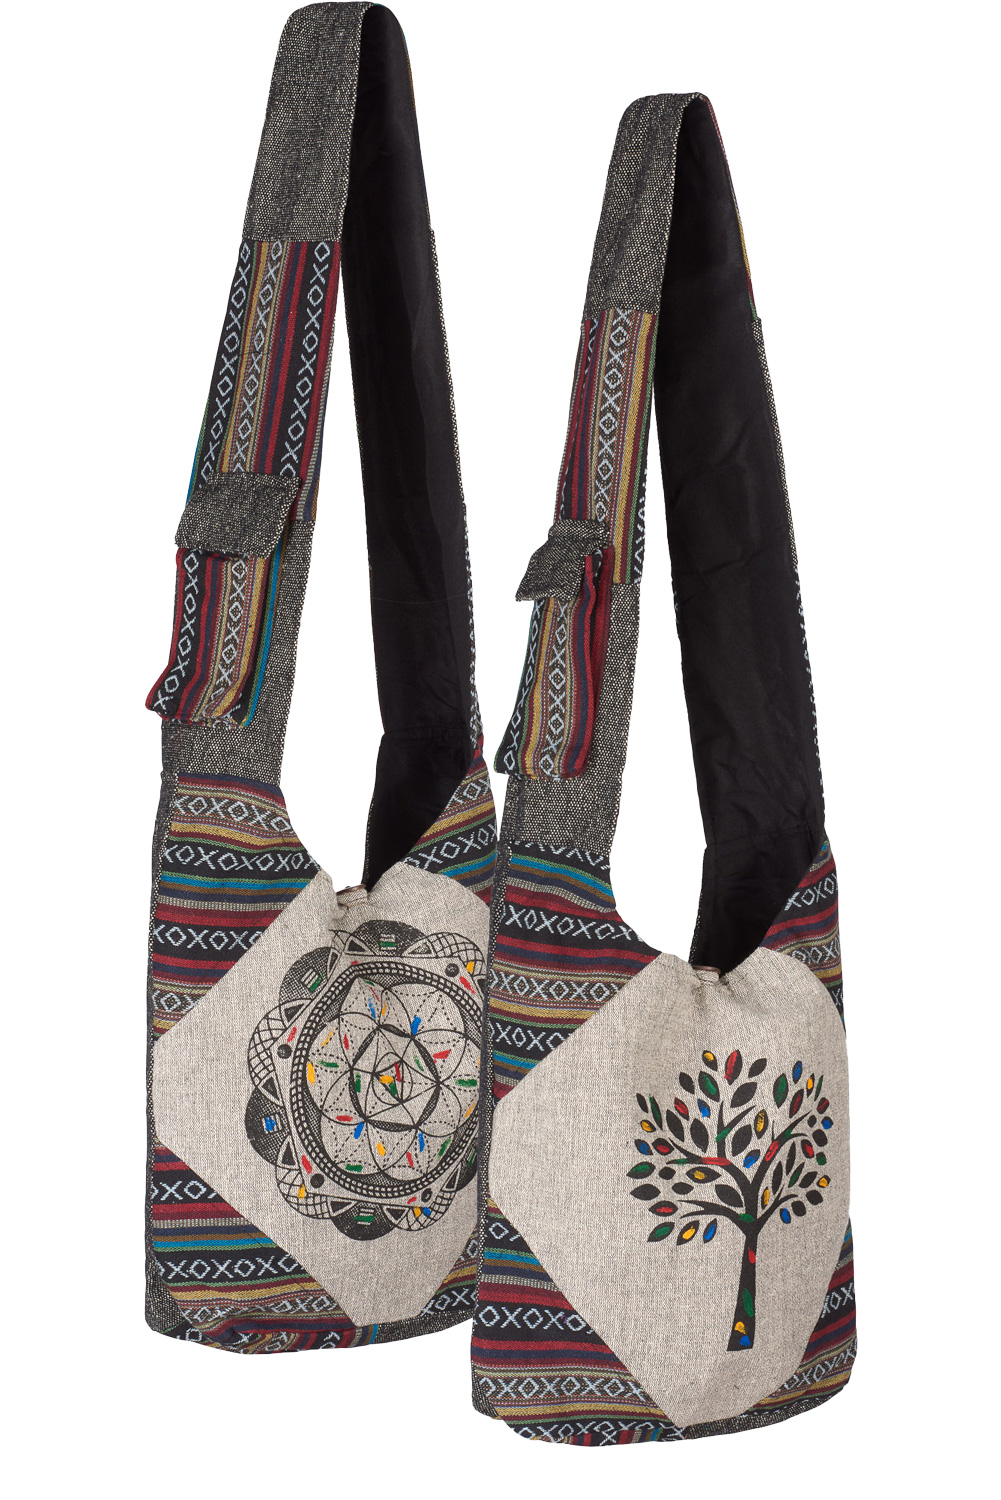 Wicked Dragon Clothing - Patchwork over the shoulder hippie bag